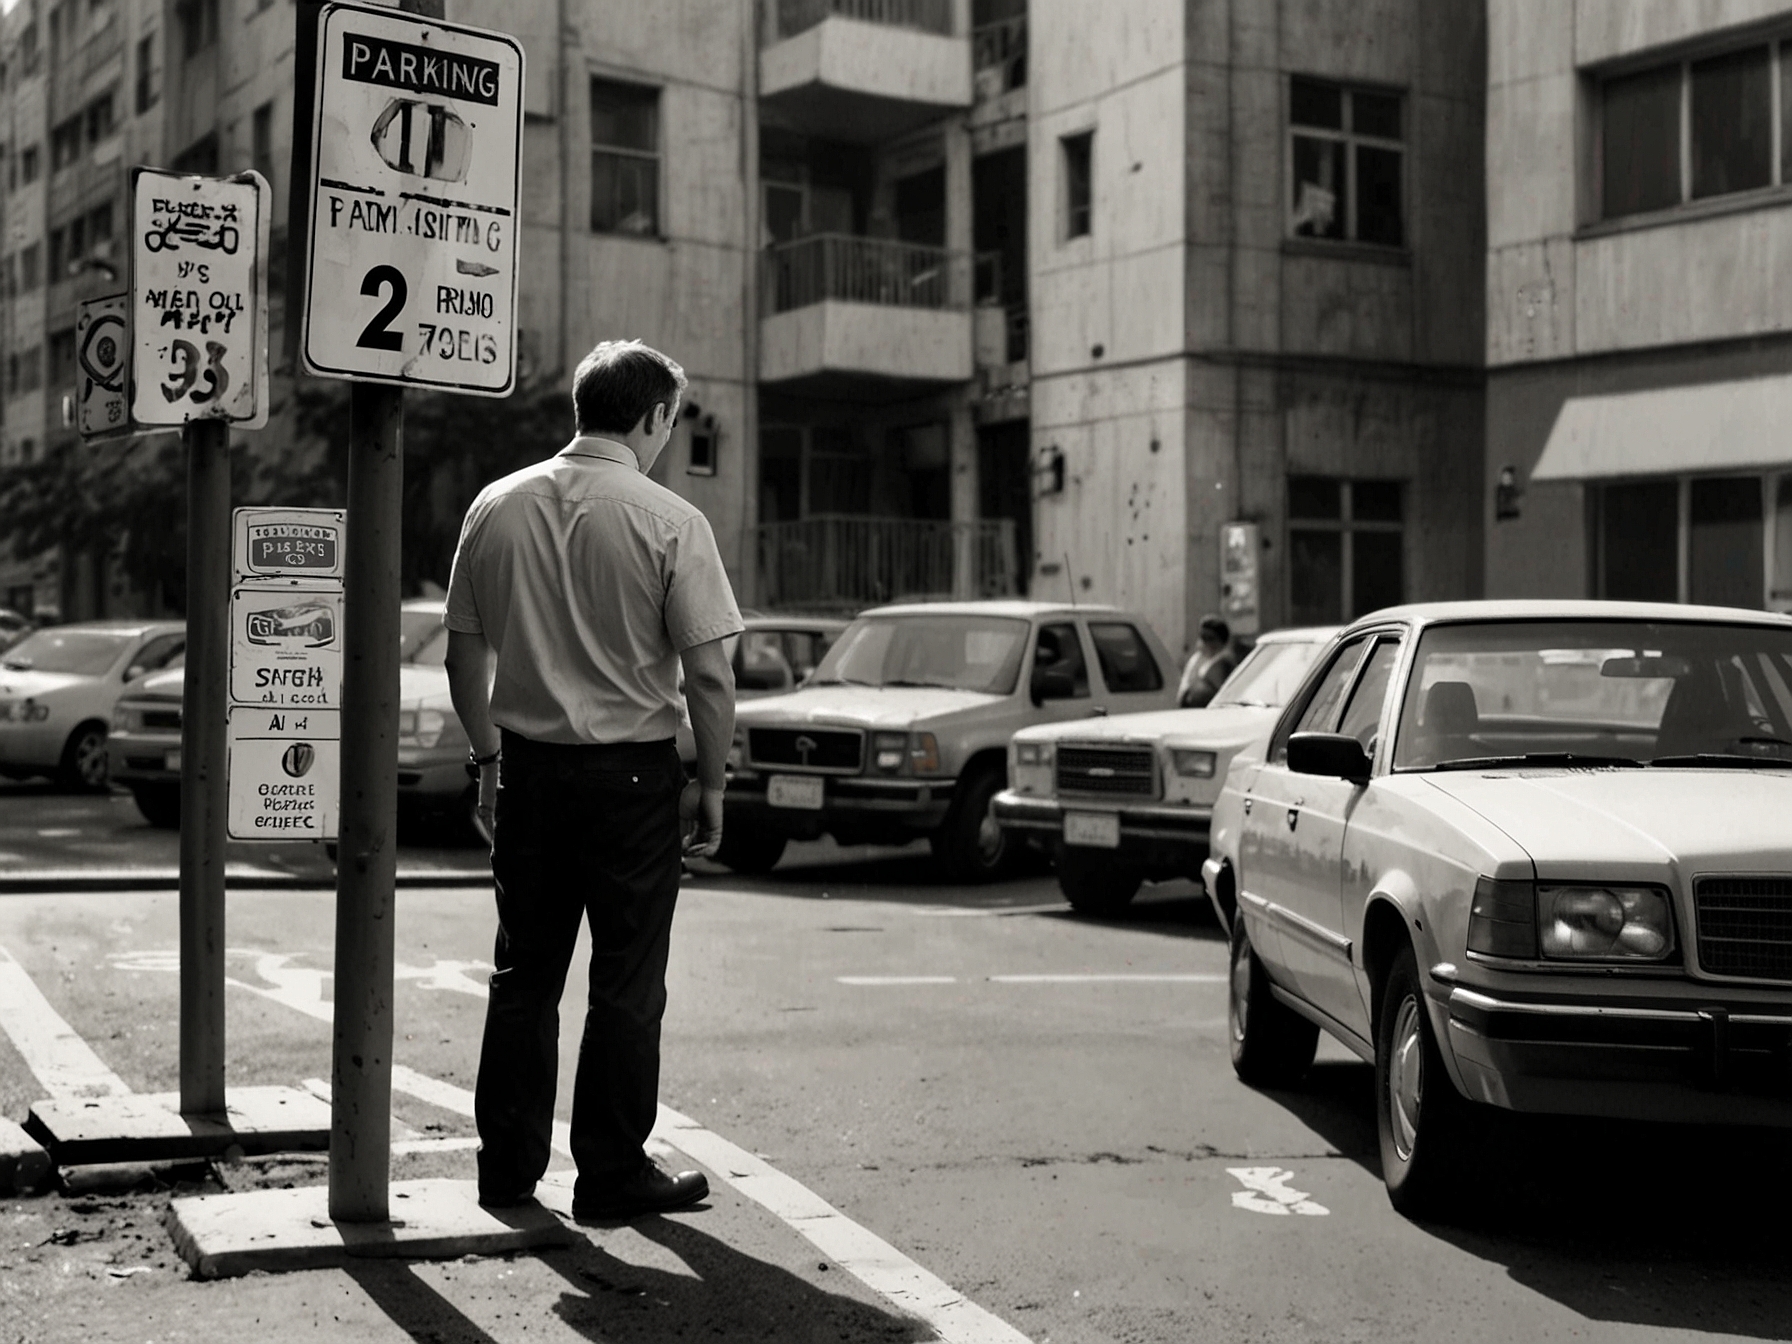 A frustrated driver stands by confusing parking signs, representing the conflicting and unclear parking regulations in urban areas.